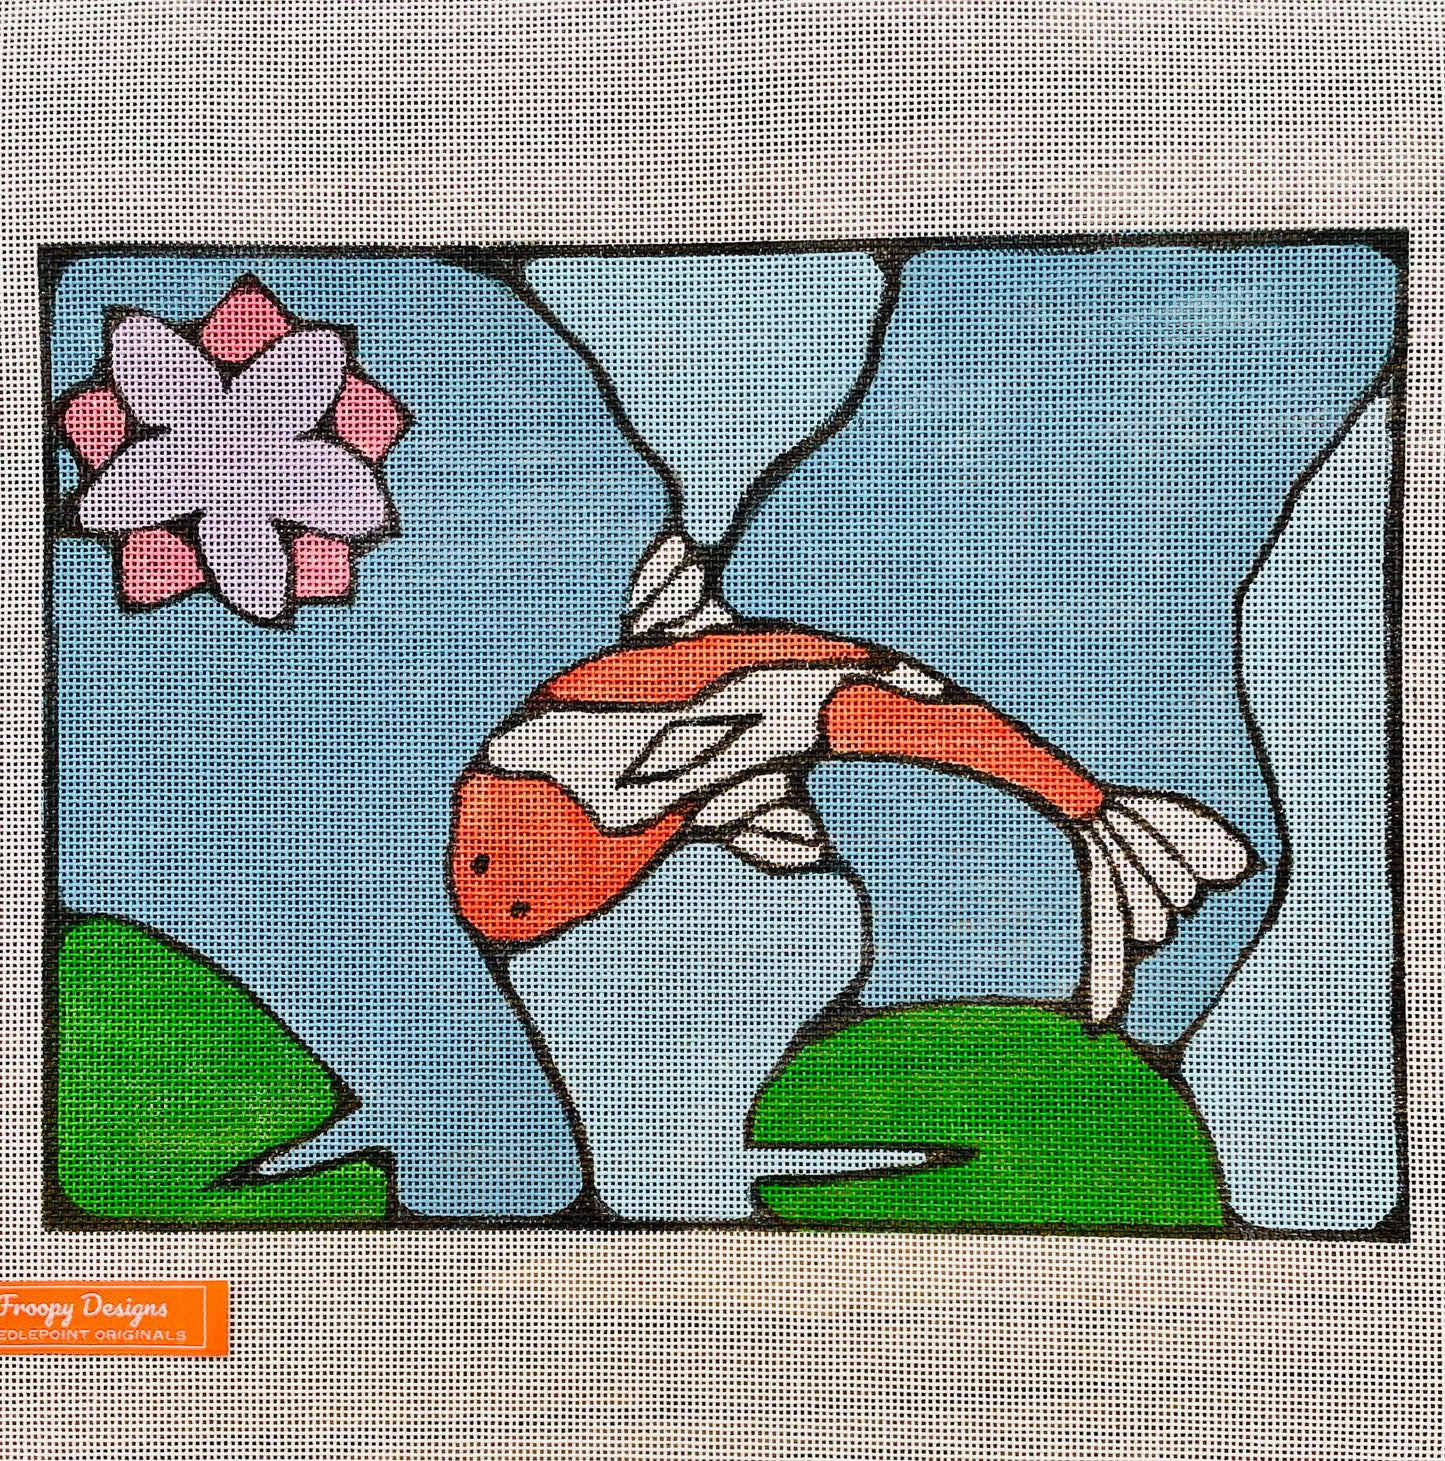 “THE KOI IN A POND”,  10 3/4” x 7 3/4” on 18 mesh